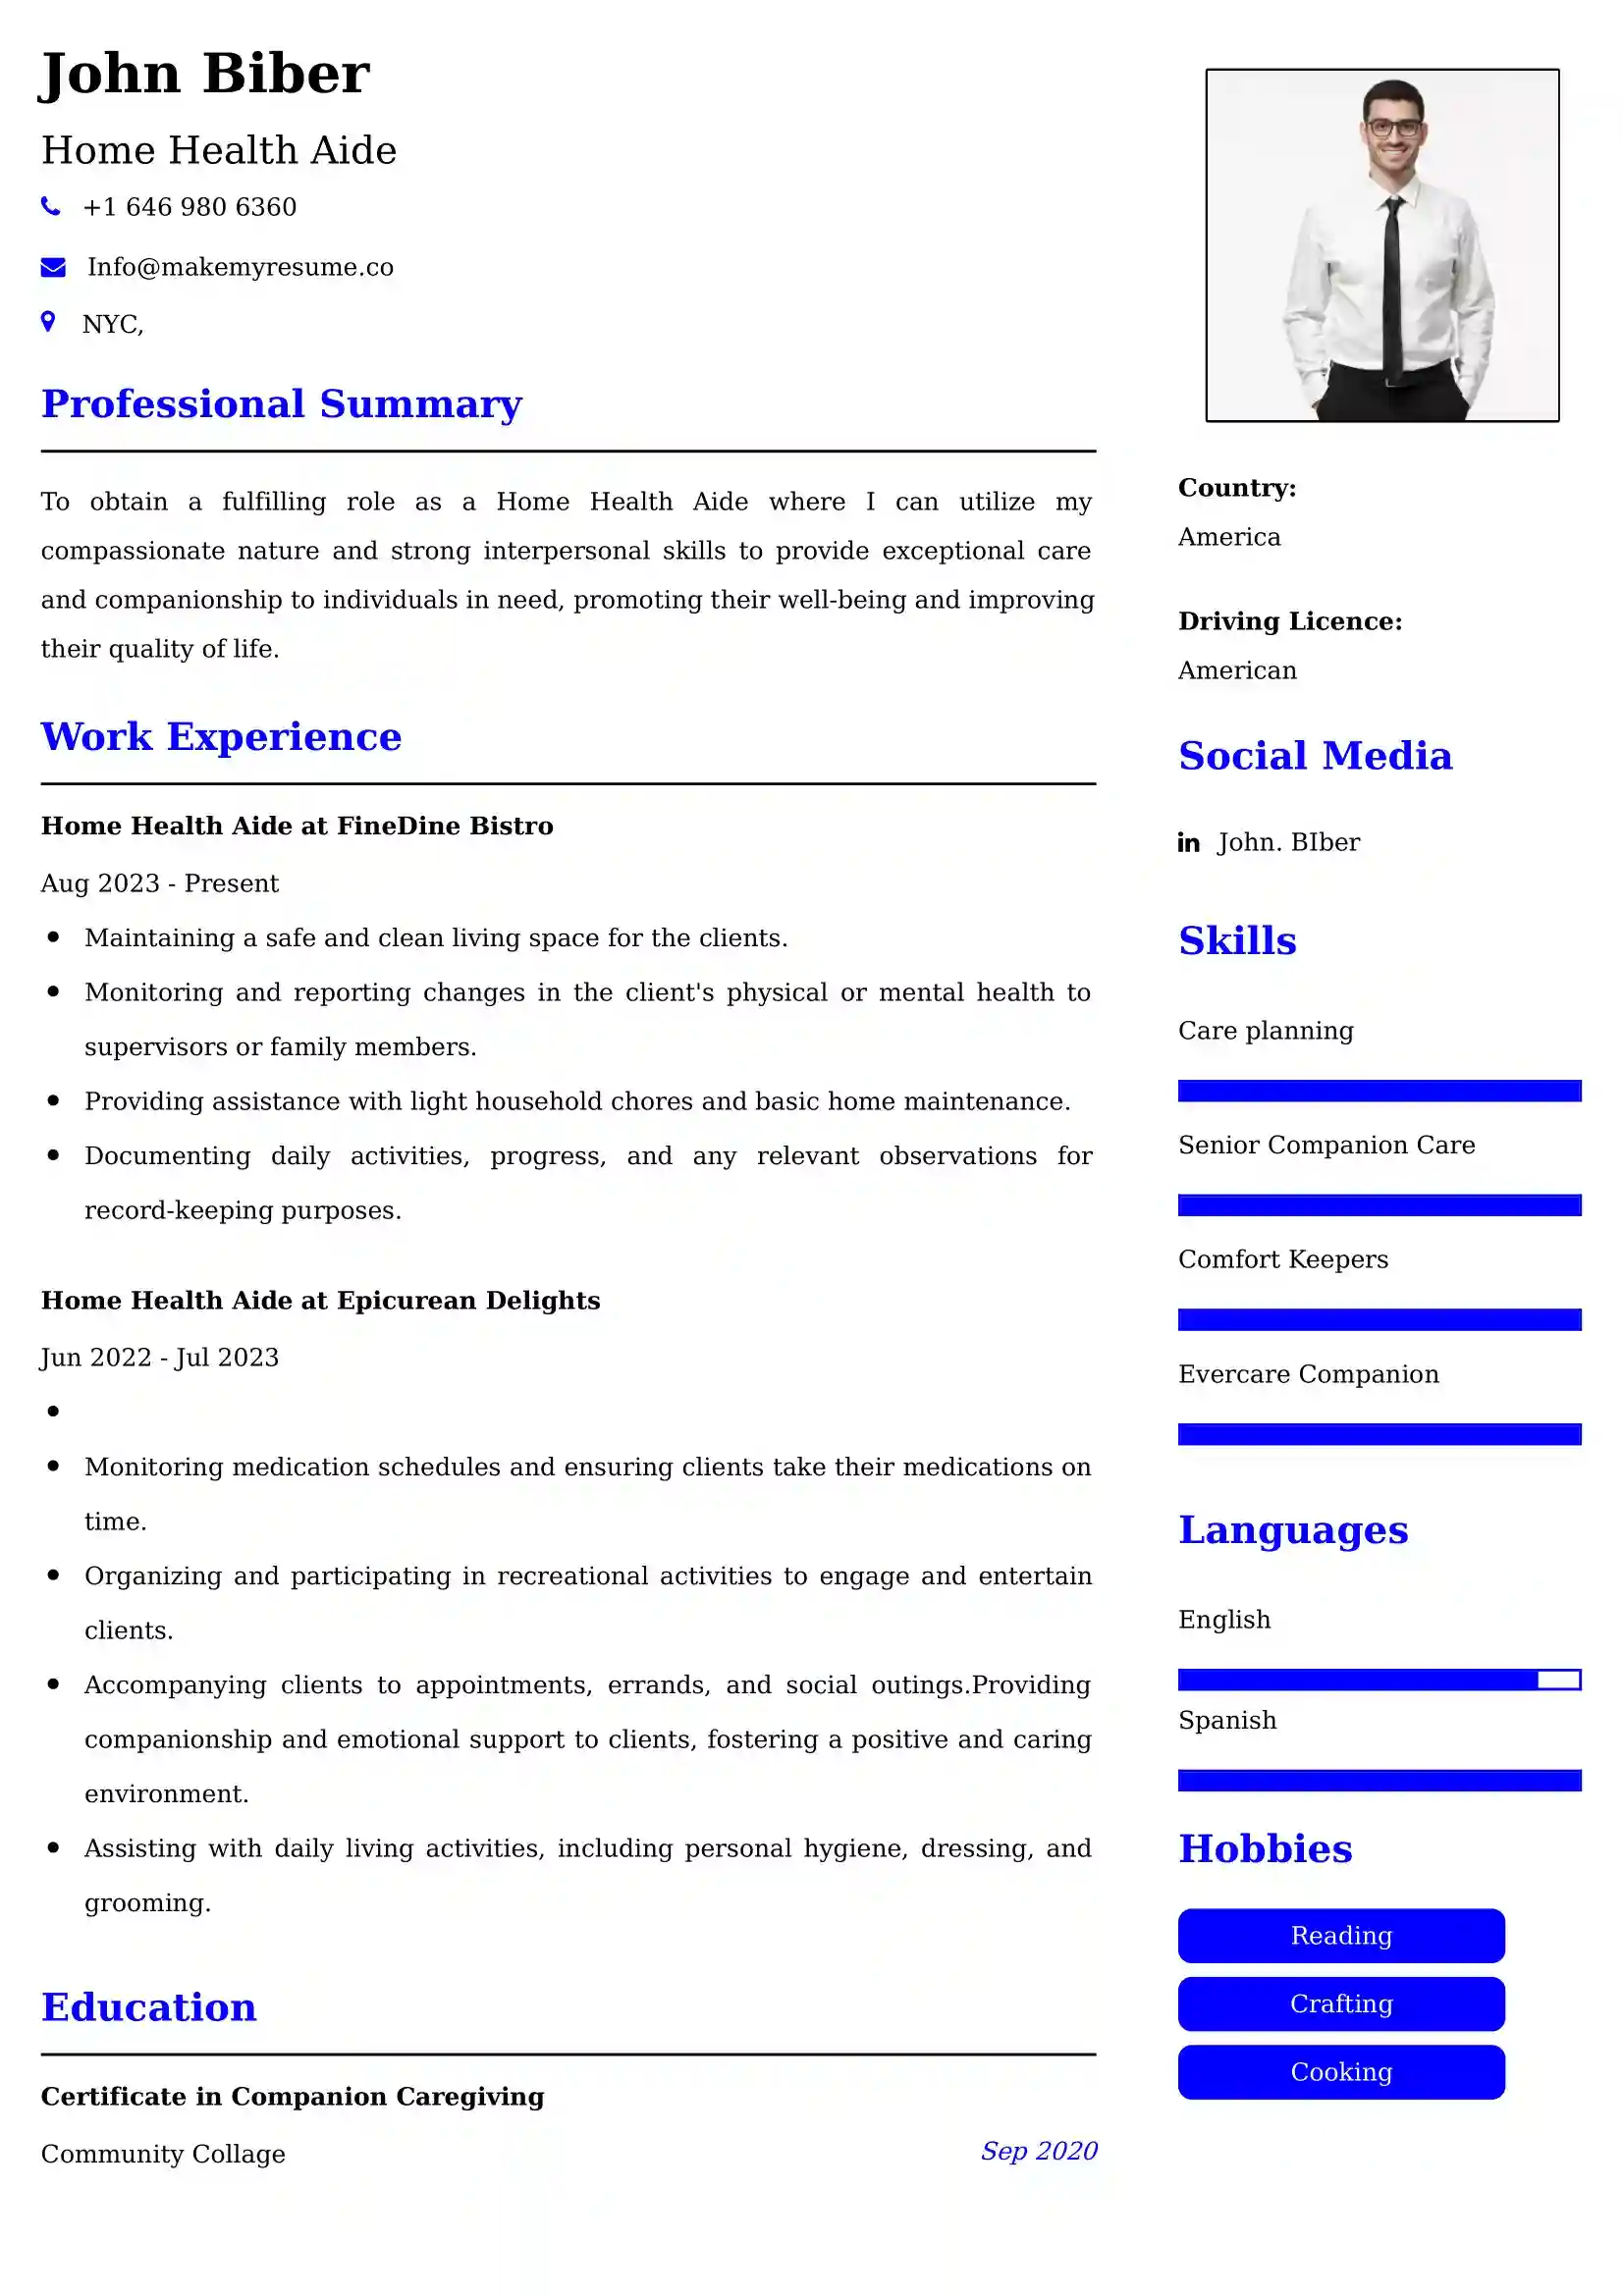 Home Health Aide Resume Examples Canada